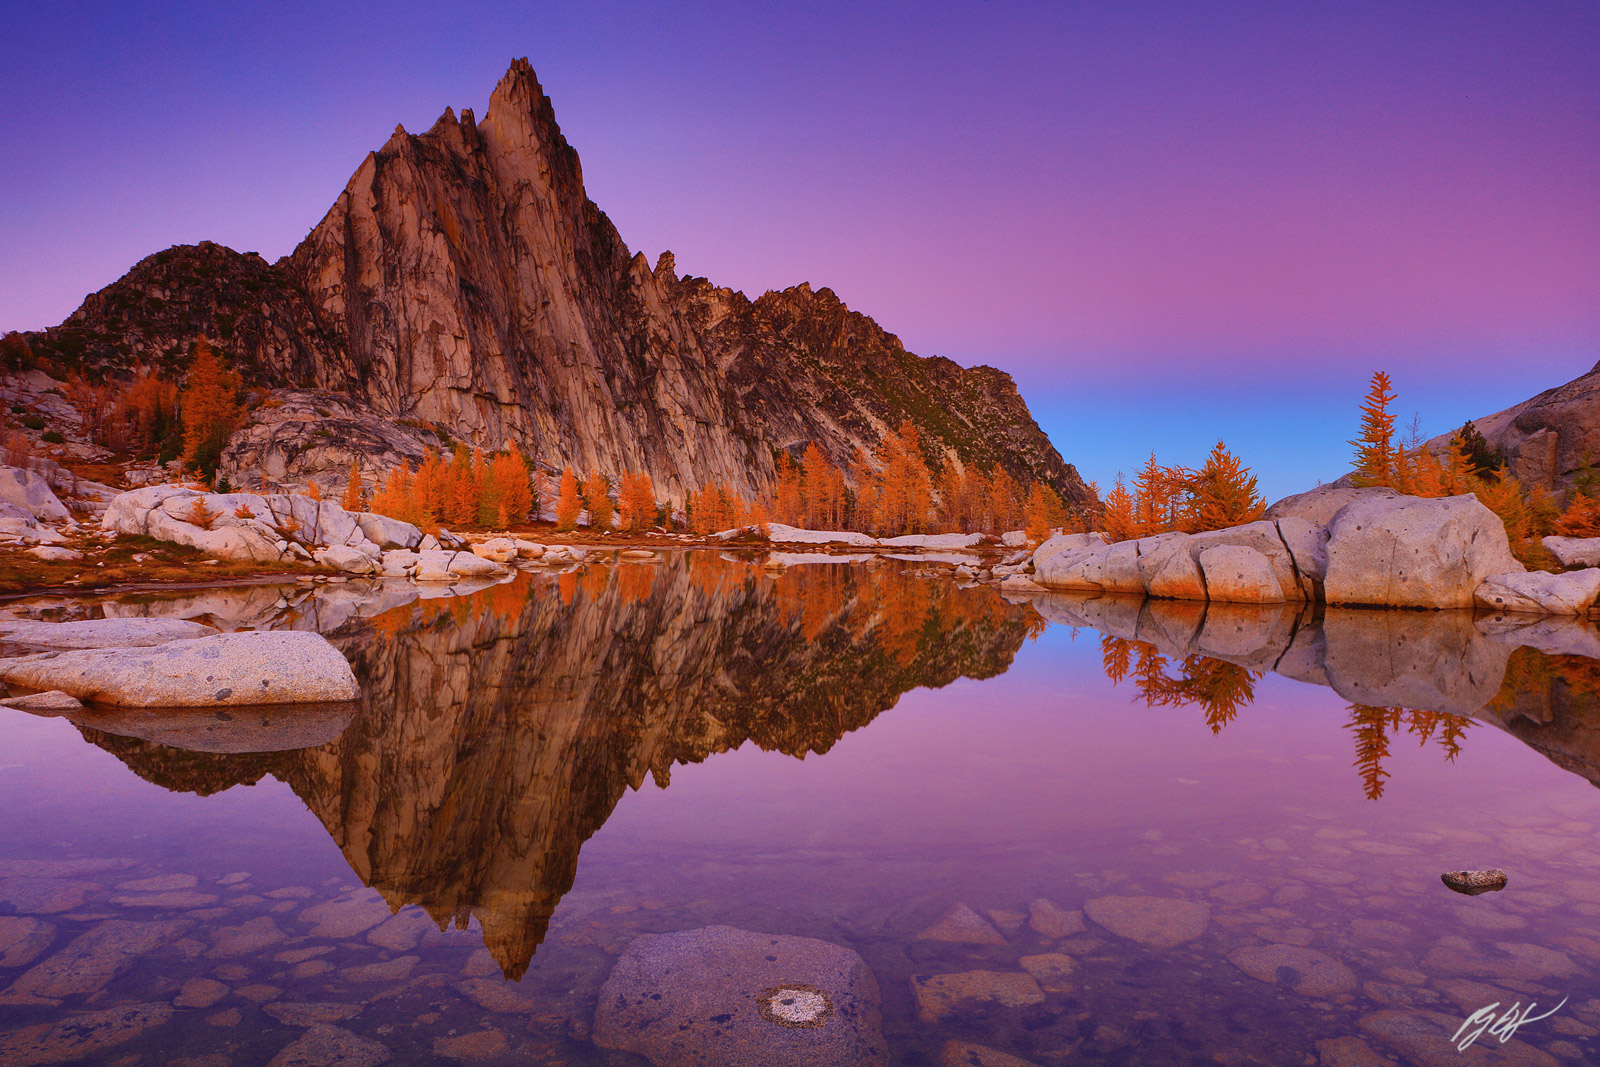 Sunset alpenglow Reflected in Gnome Tarn in the Enchantments, Alpine Lakes Wilderness in Washington